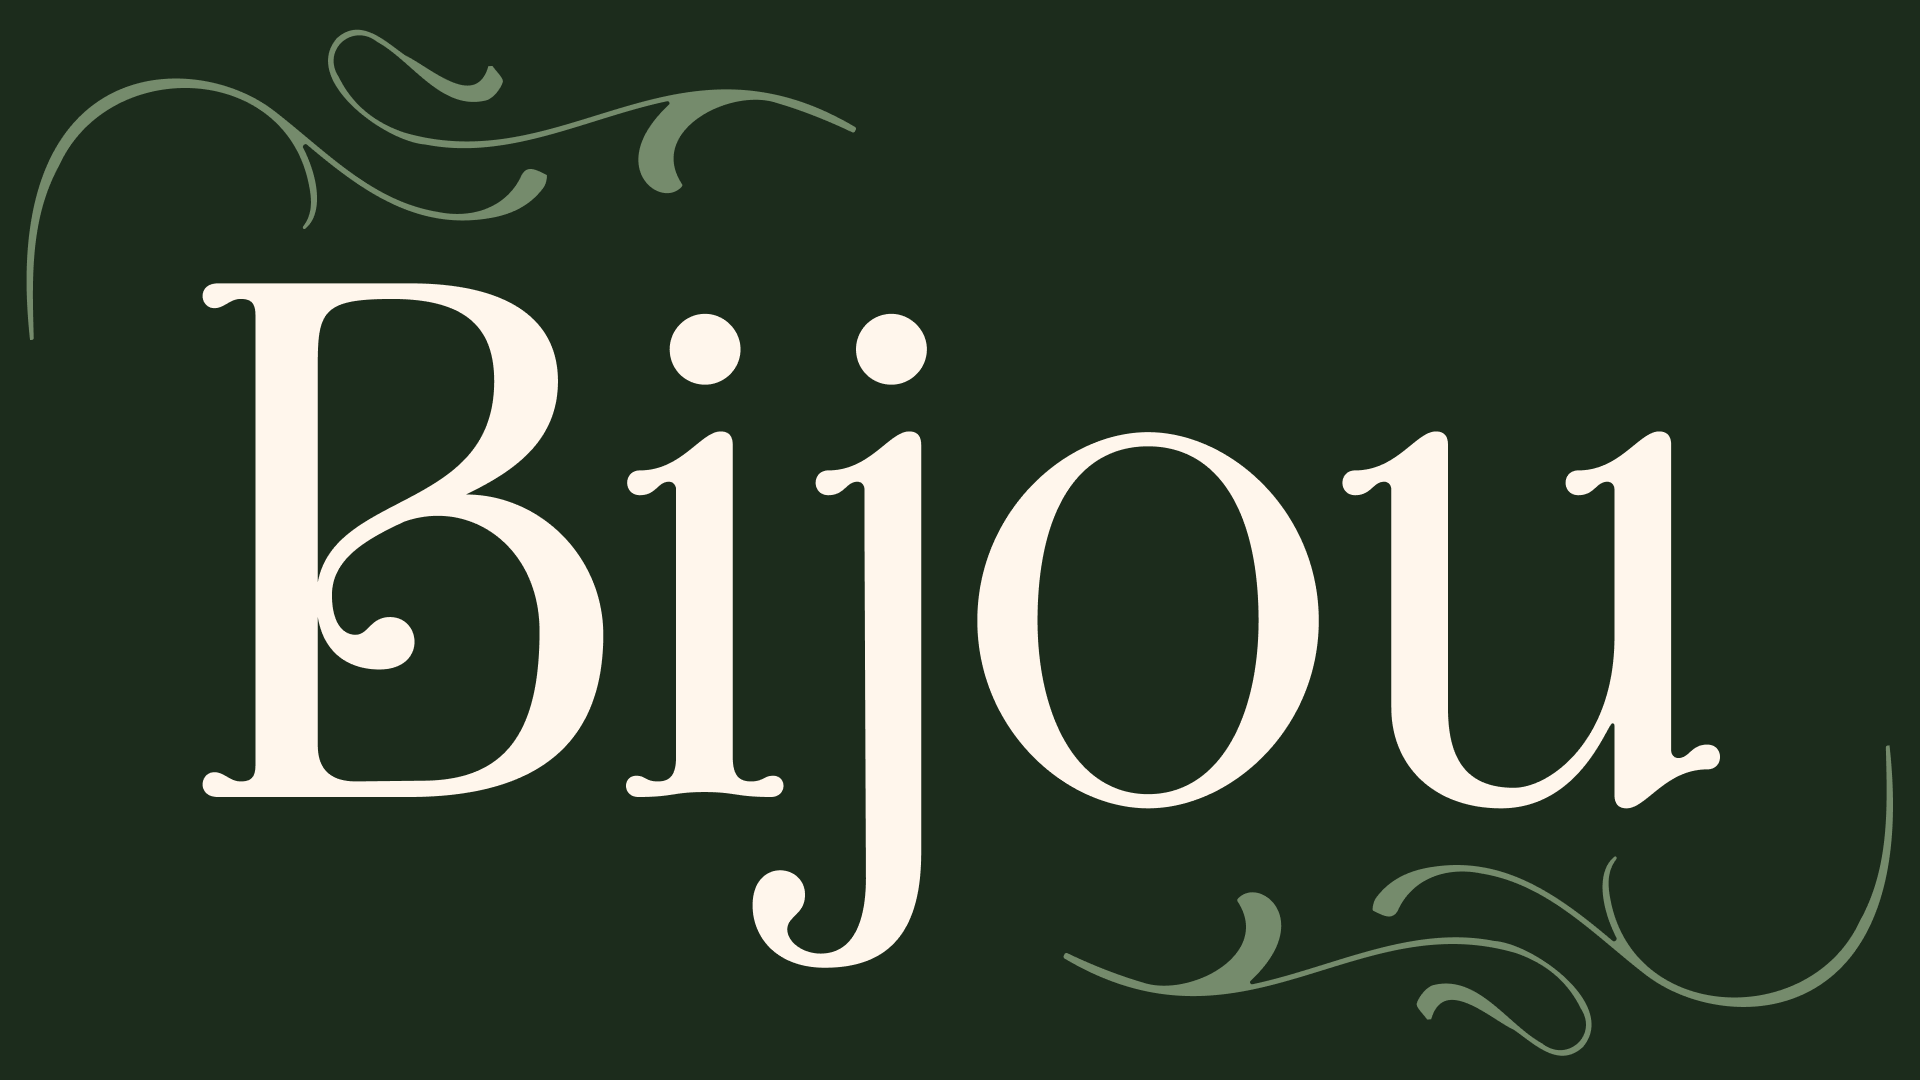 "Bijou" written as a title screen, with green flourishes in the corners